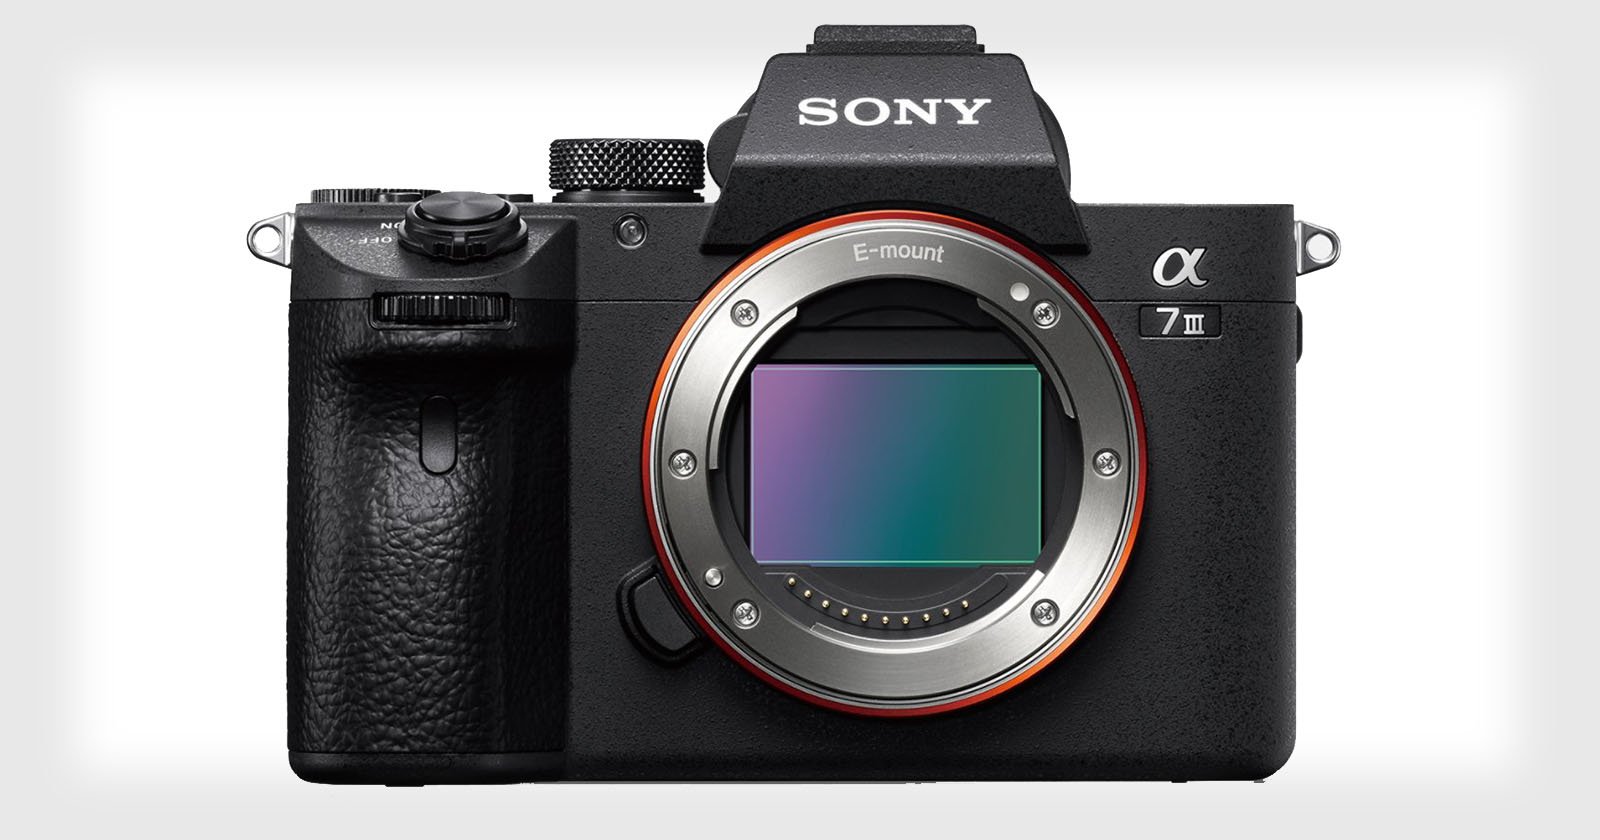 Sony a7 III: A Feature-Filled 24MP and 4K Full-Frame Mirrorless for $1,999